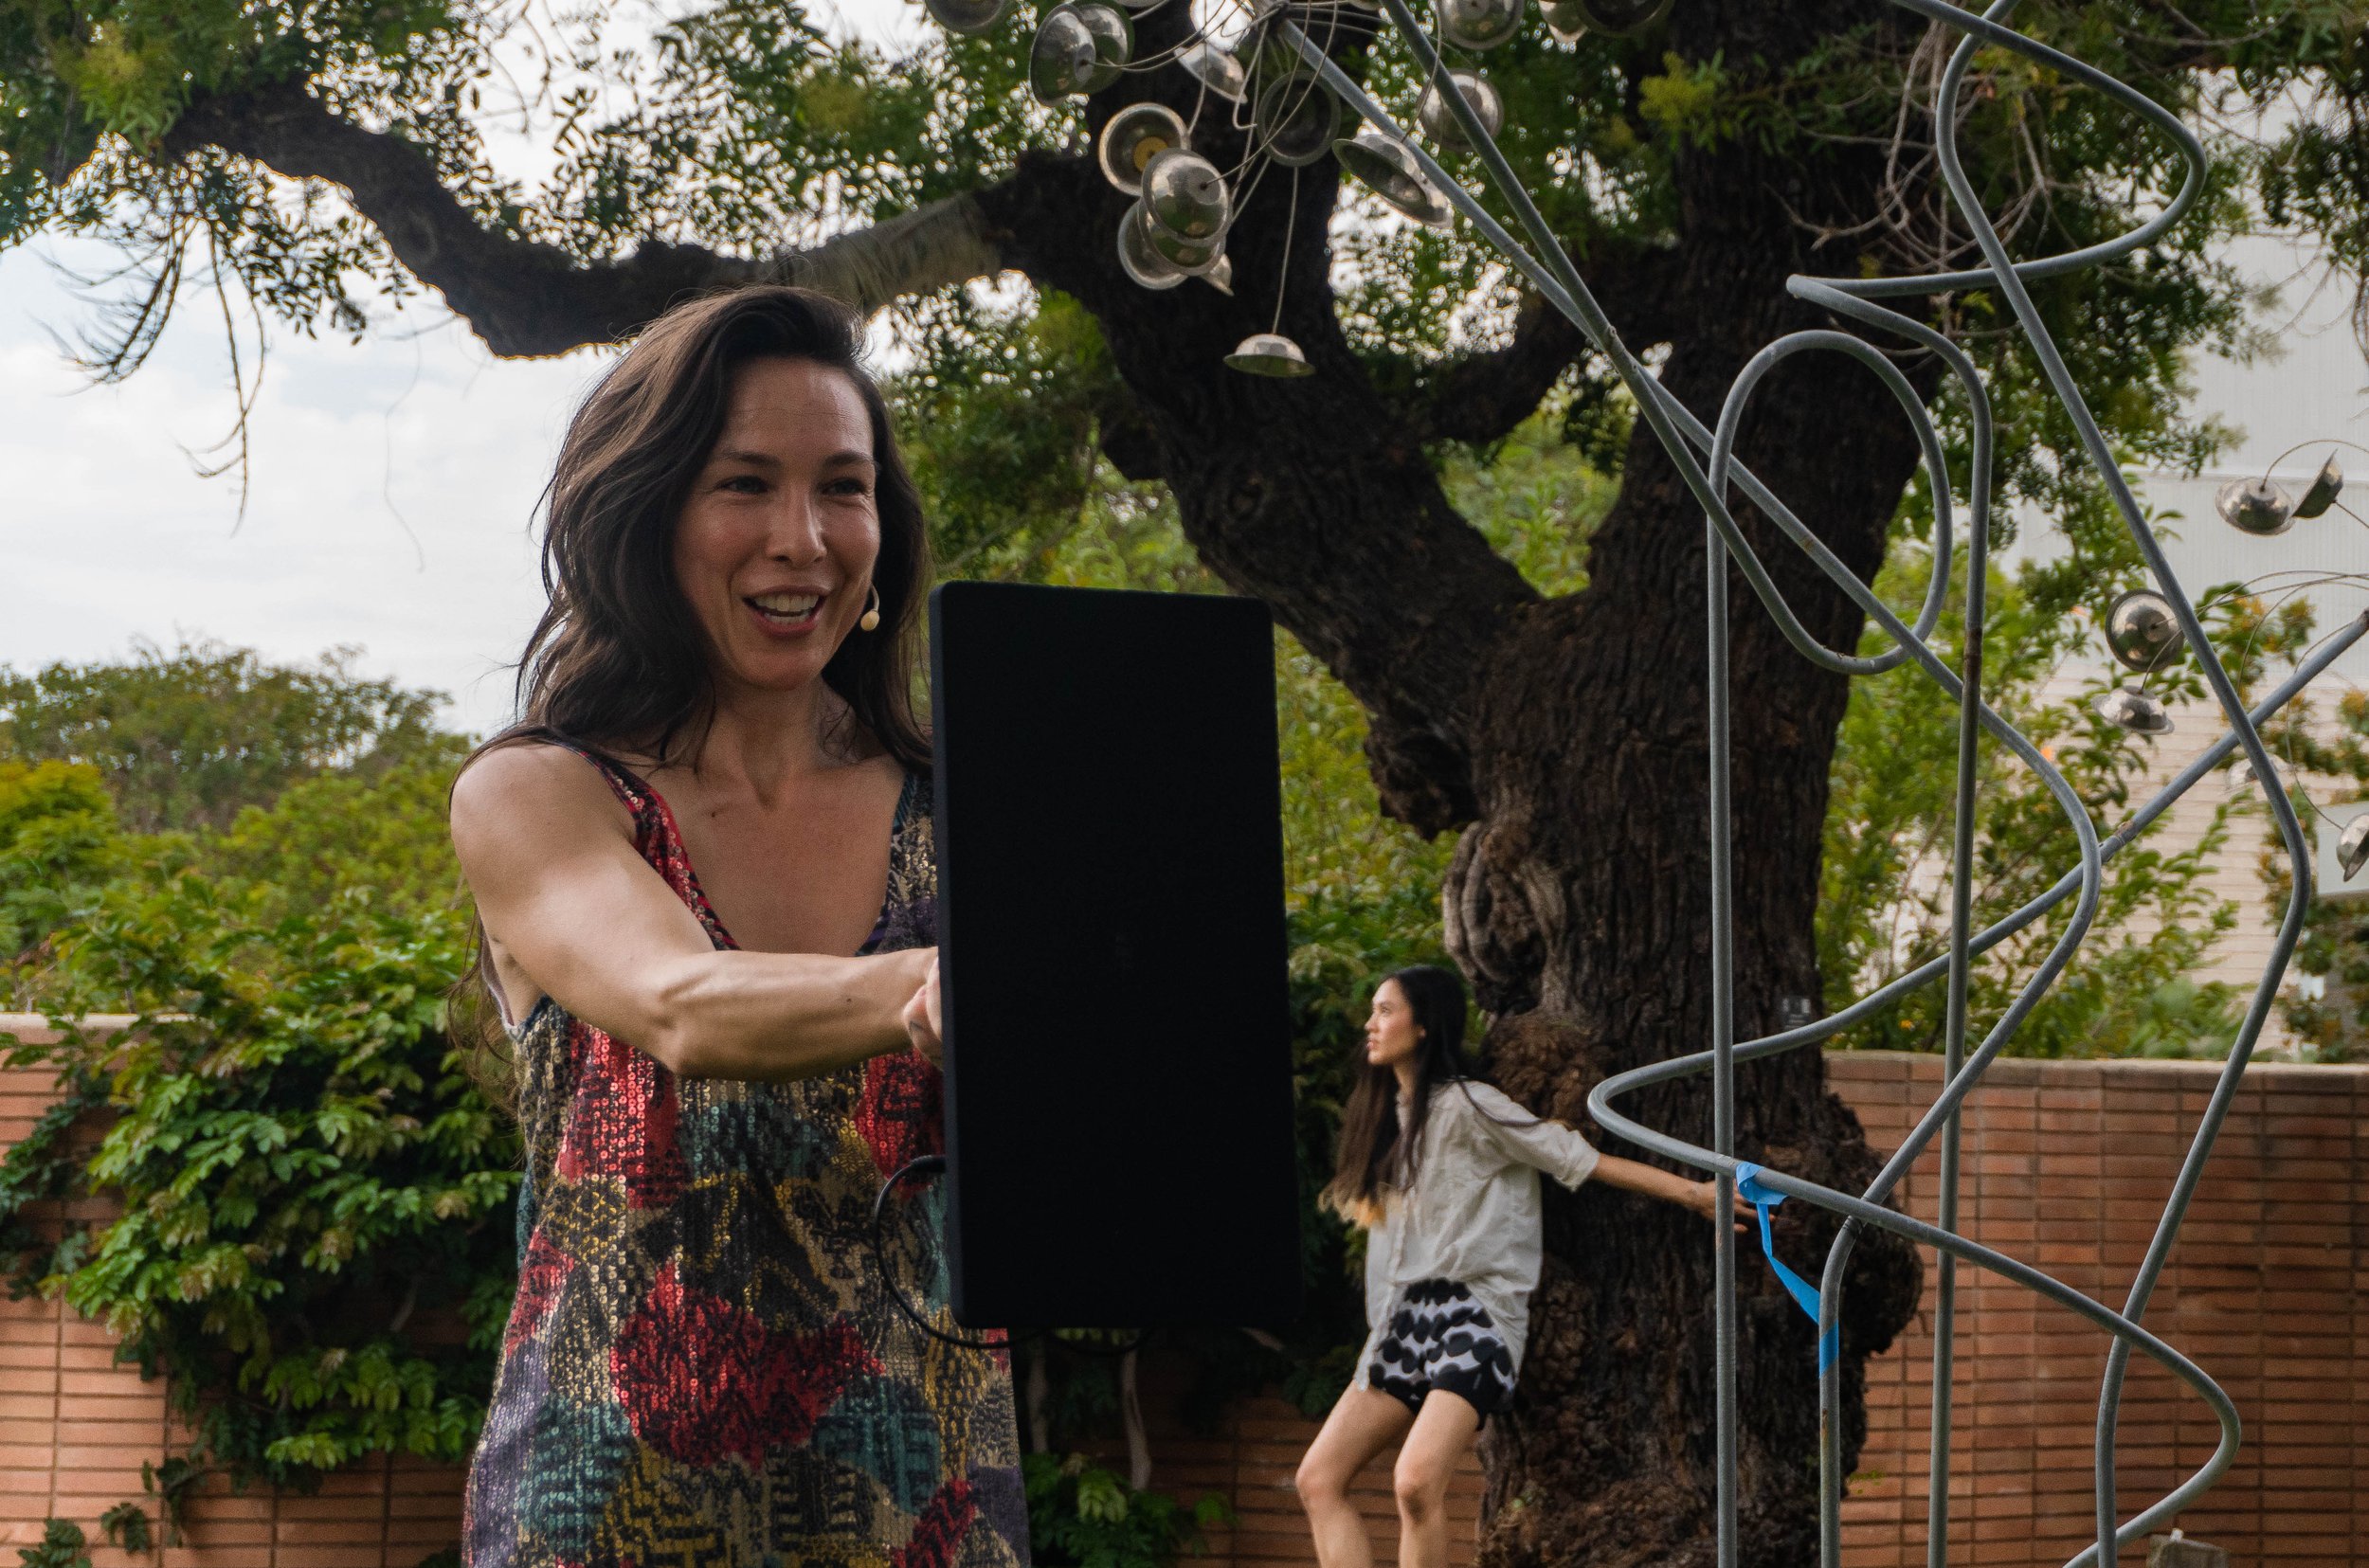  Emily Johnson, Native Alaskan artist of Yupik descent, choreographer and artistic director of Catalyst whispers and holds a speaker before her audience, while Sugar Vendil, Catalyst performer performs the third and final  around the courtyard of San